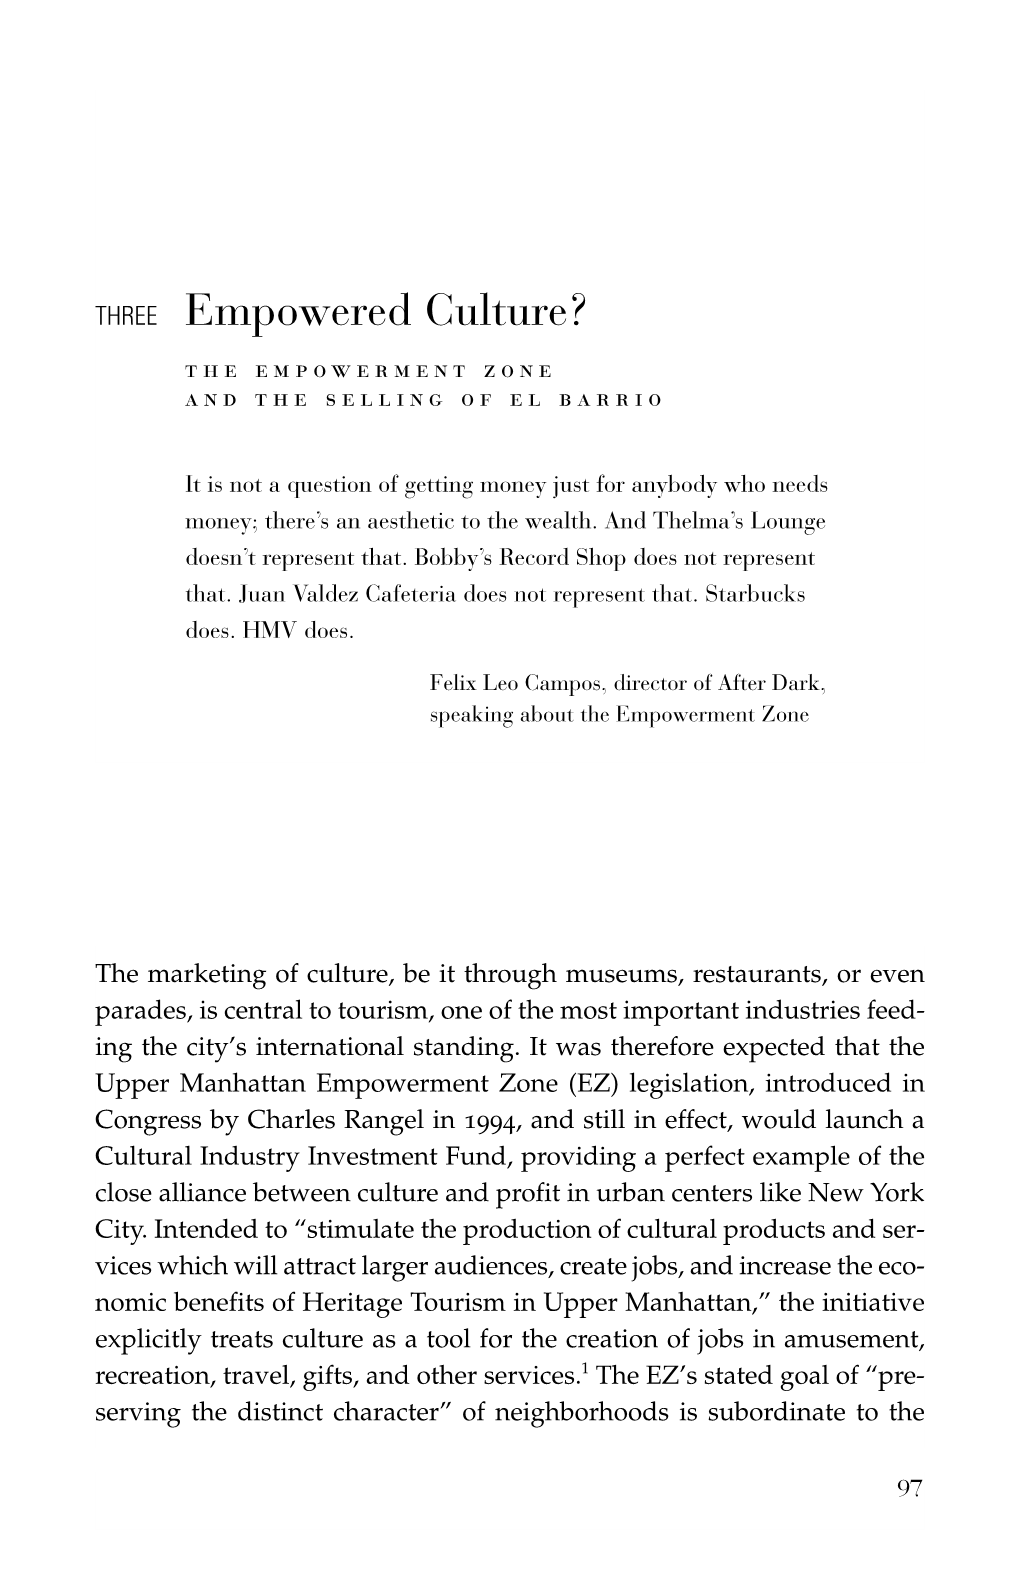 THREE Empowered Culture? the Empowerment Zone and the Selling of El Barrio